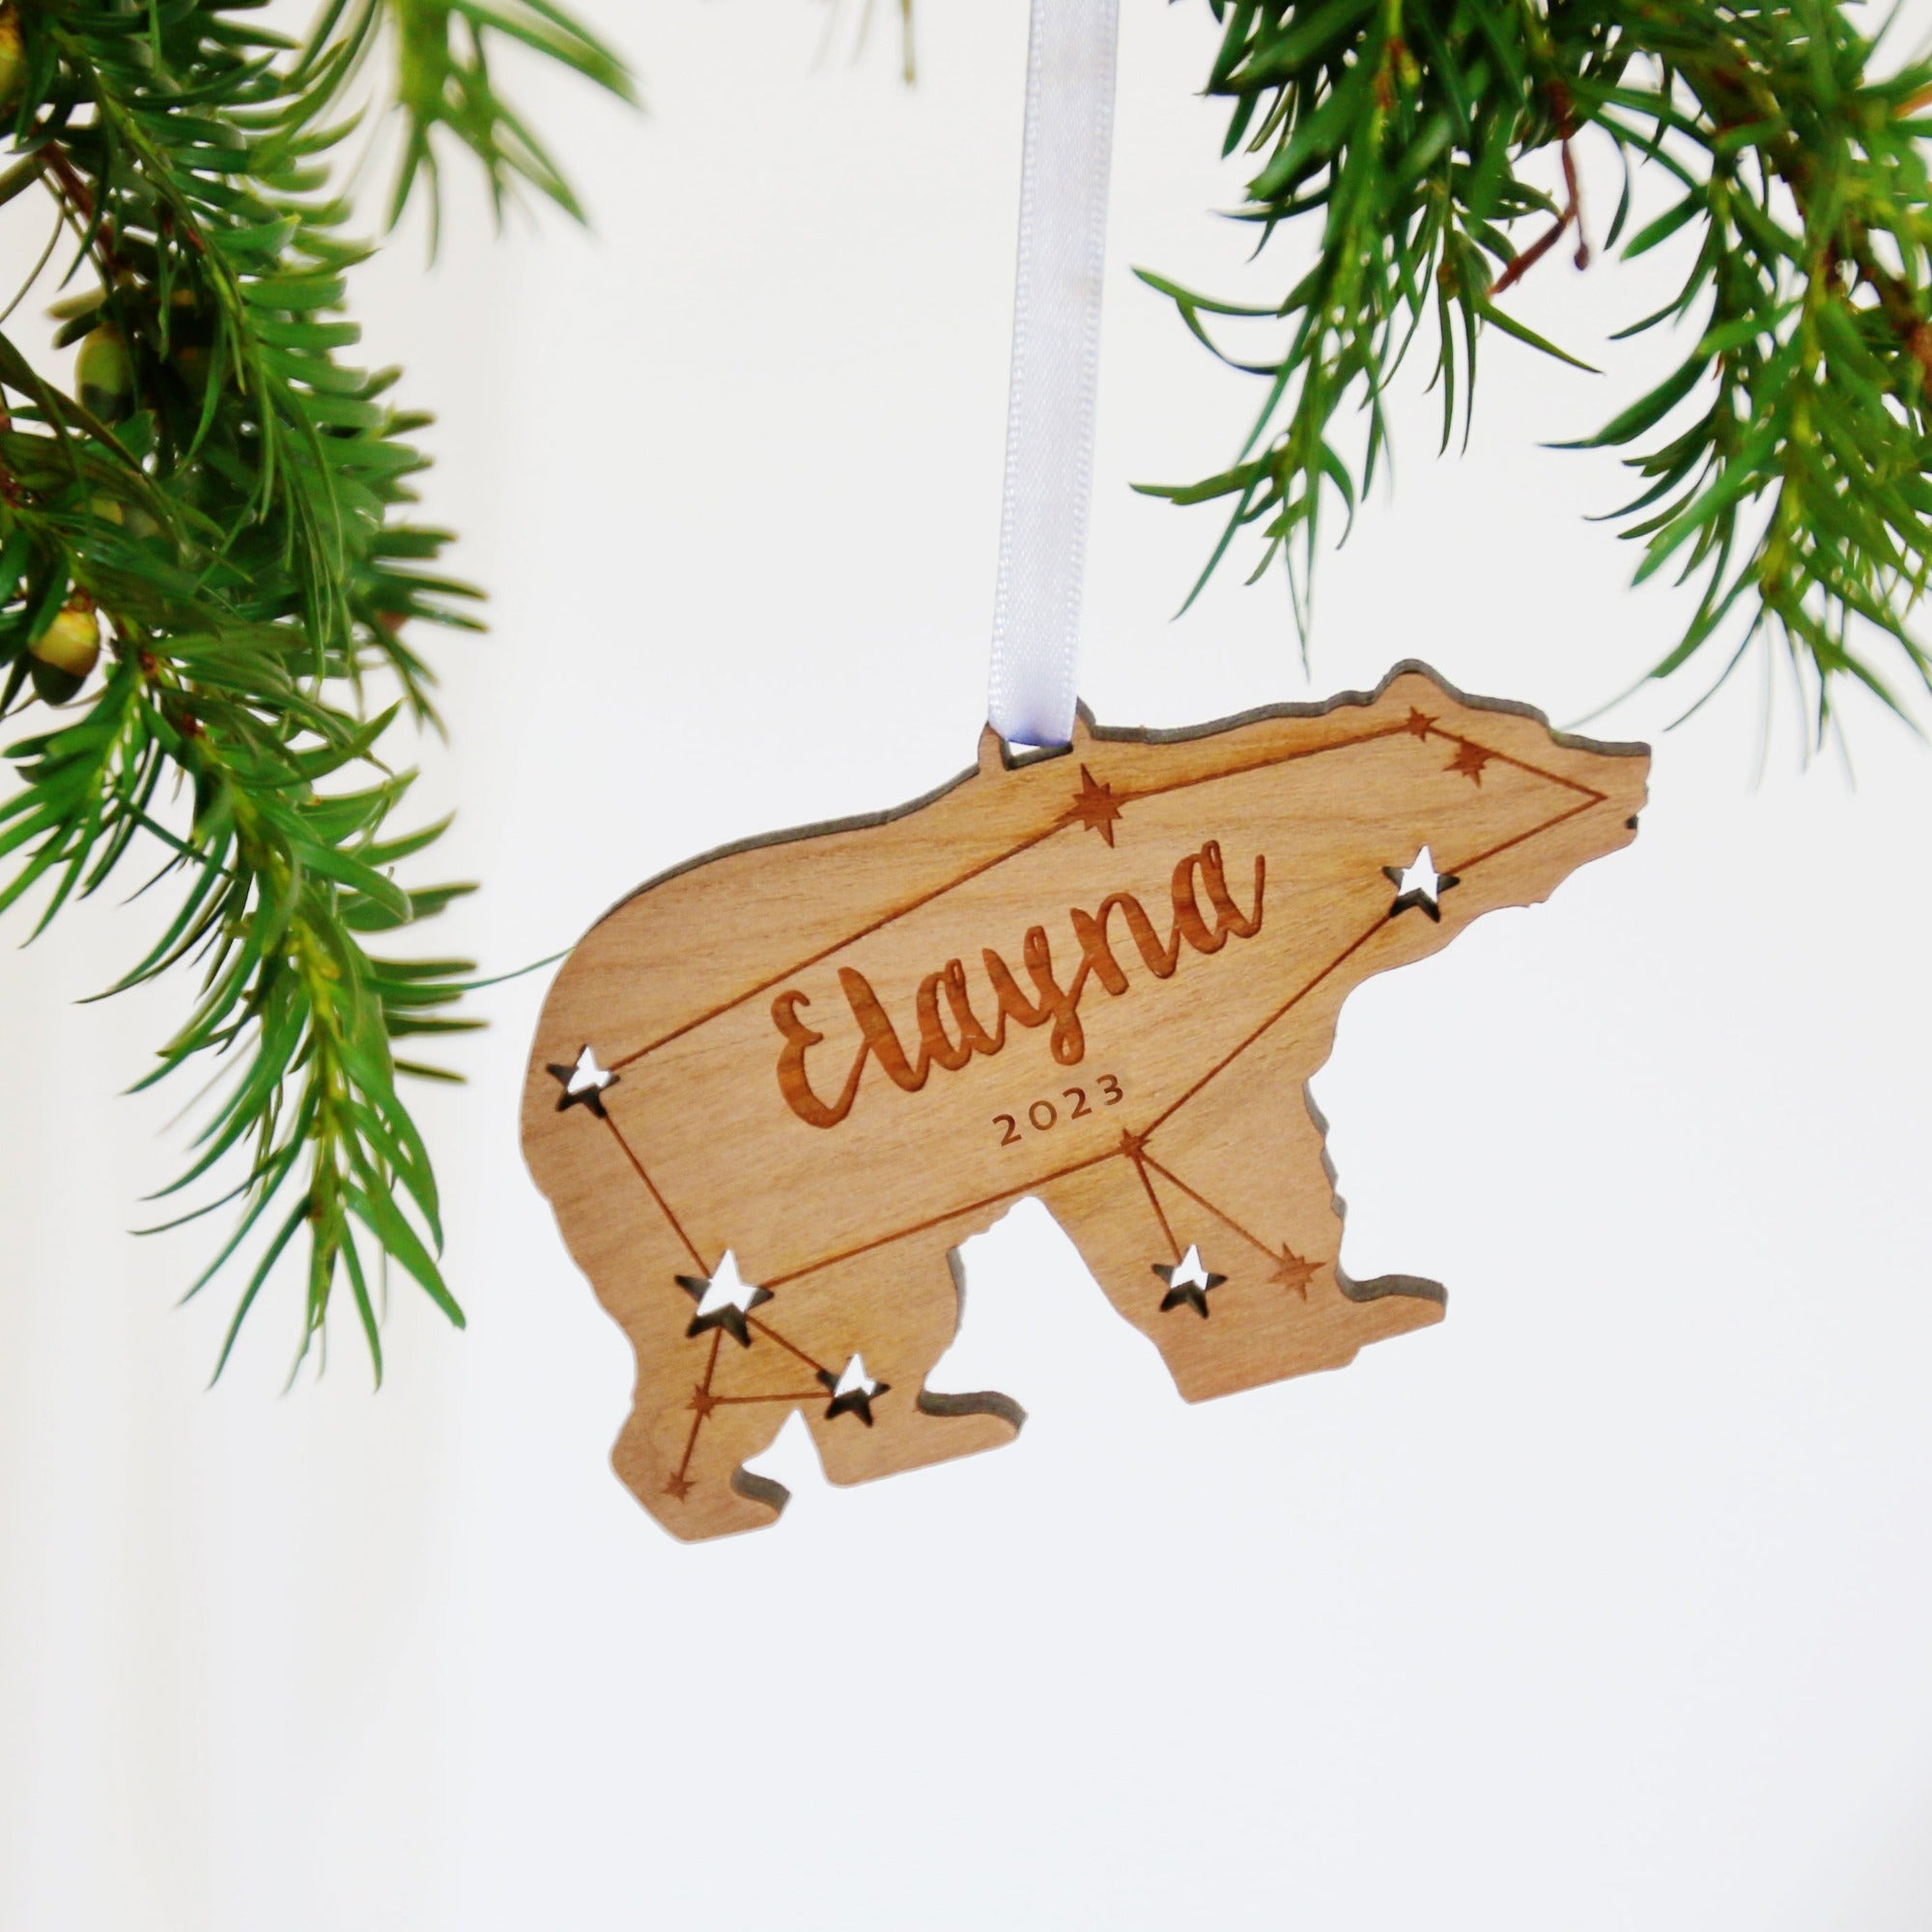 Personalised wooden Christmas decoration in the shape of a polar bear